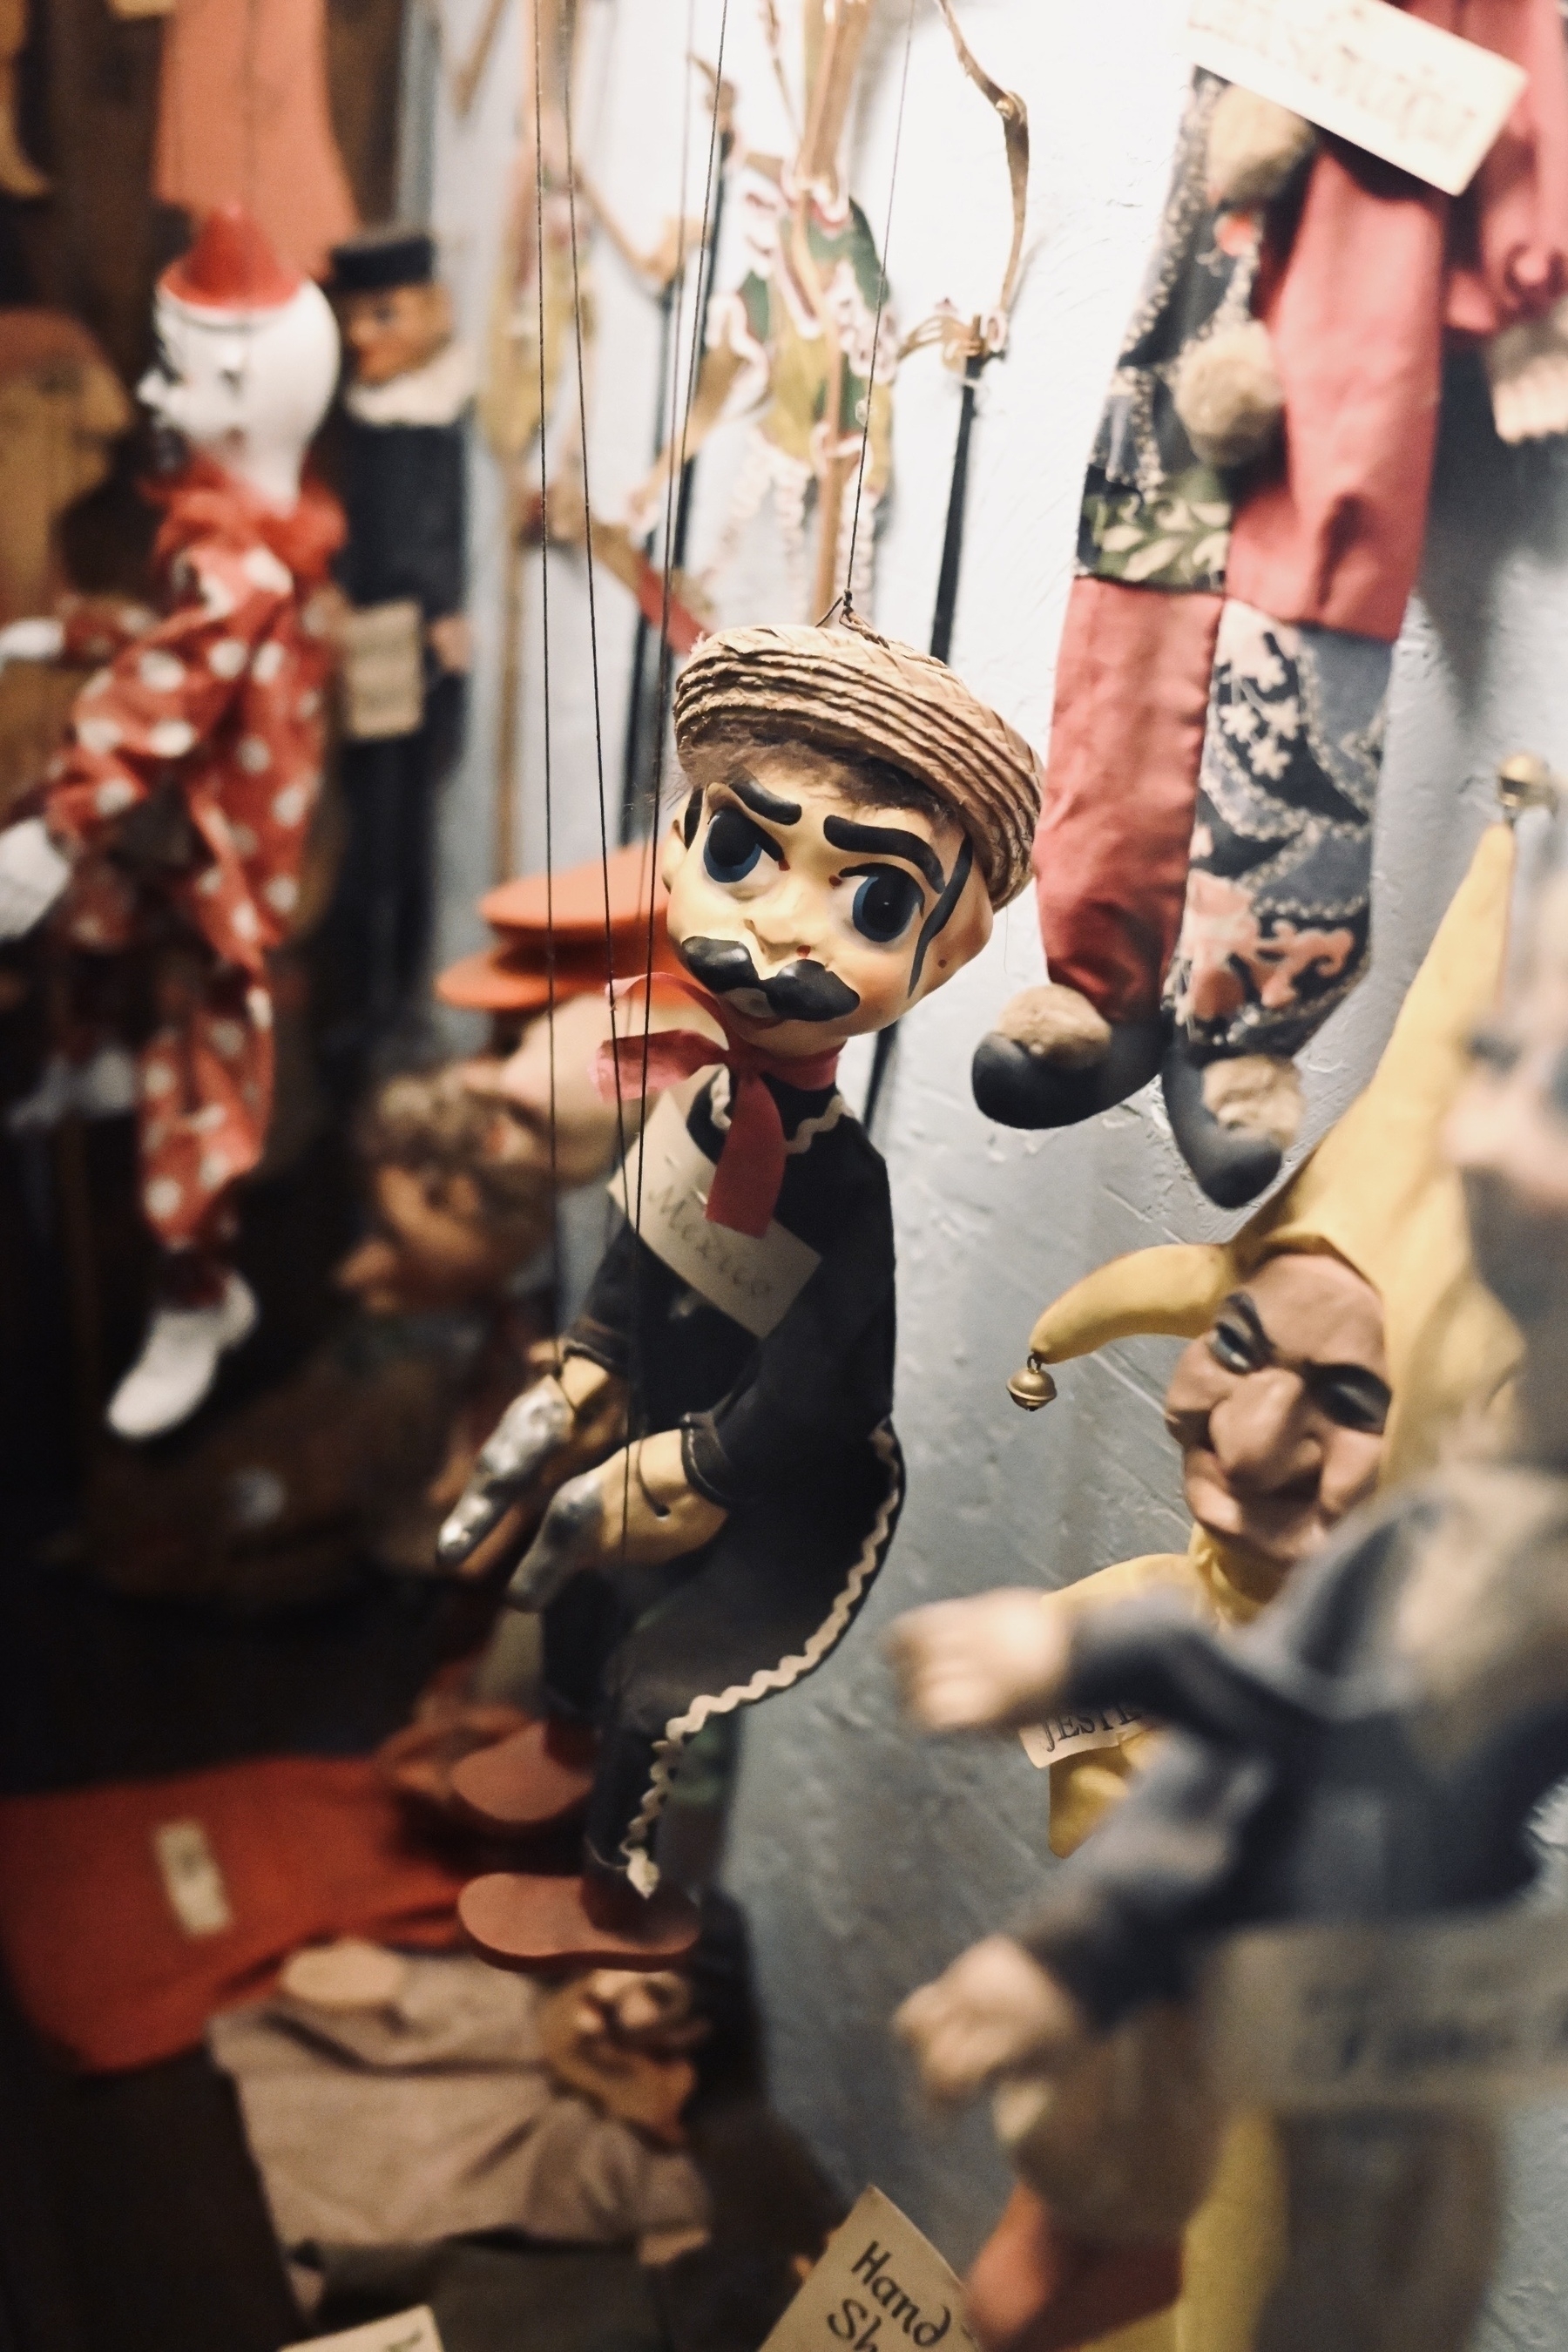 Marionette puppets with various costumes and facial expressions hang on display, some with strings attached to their limbs and labels around their necks.